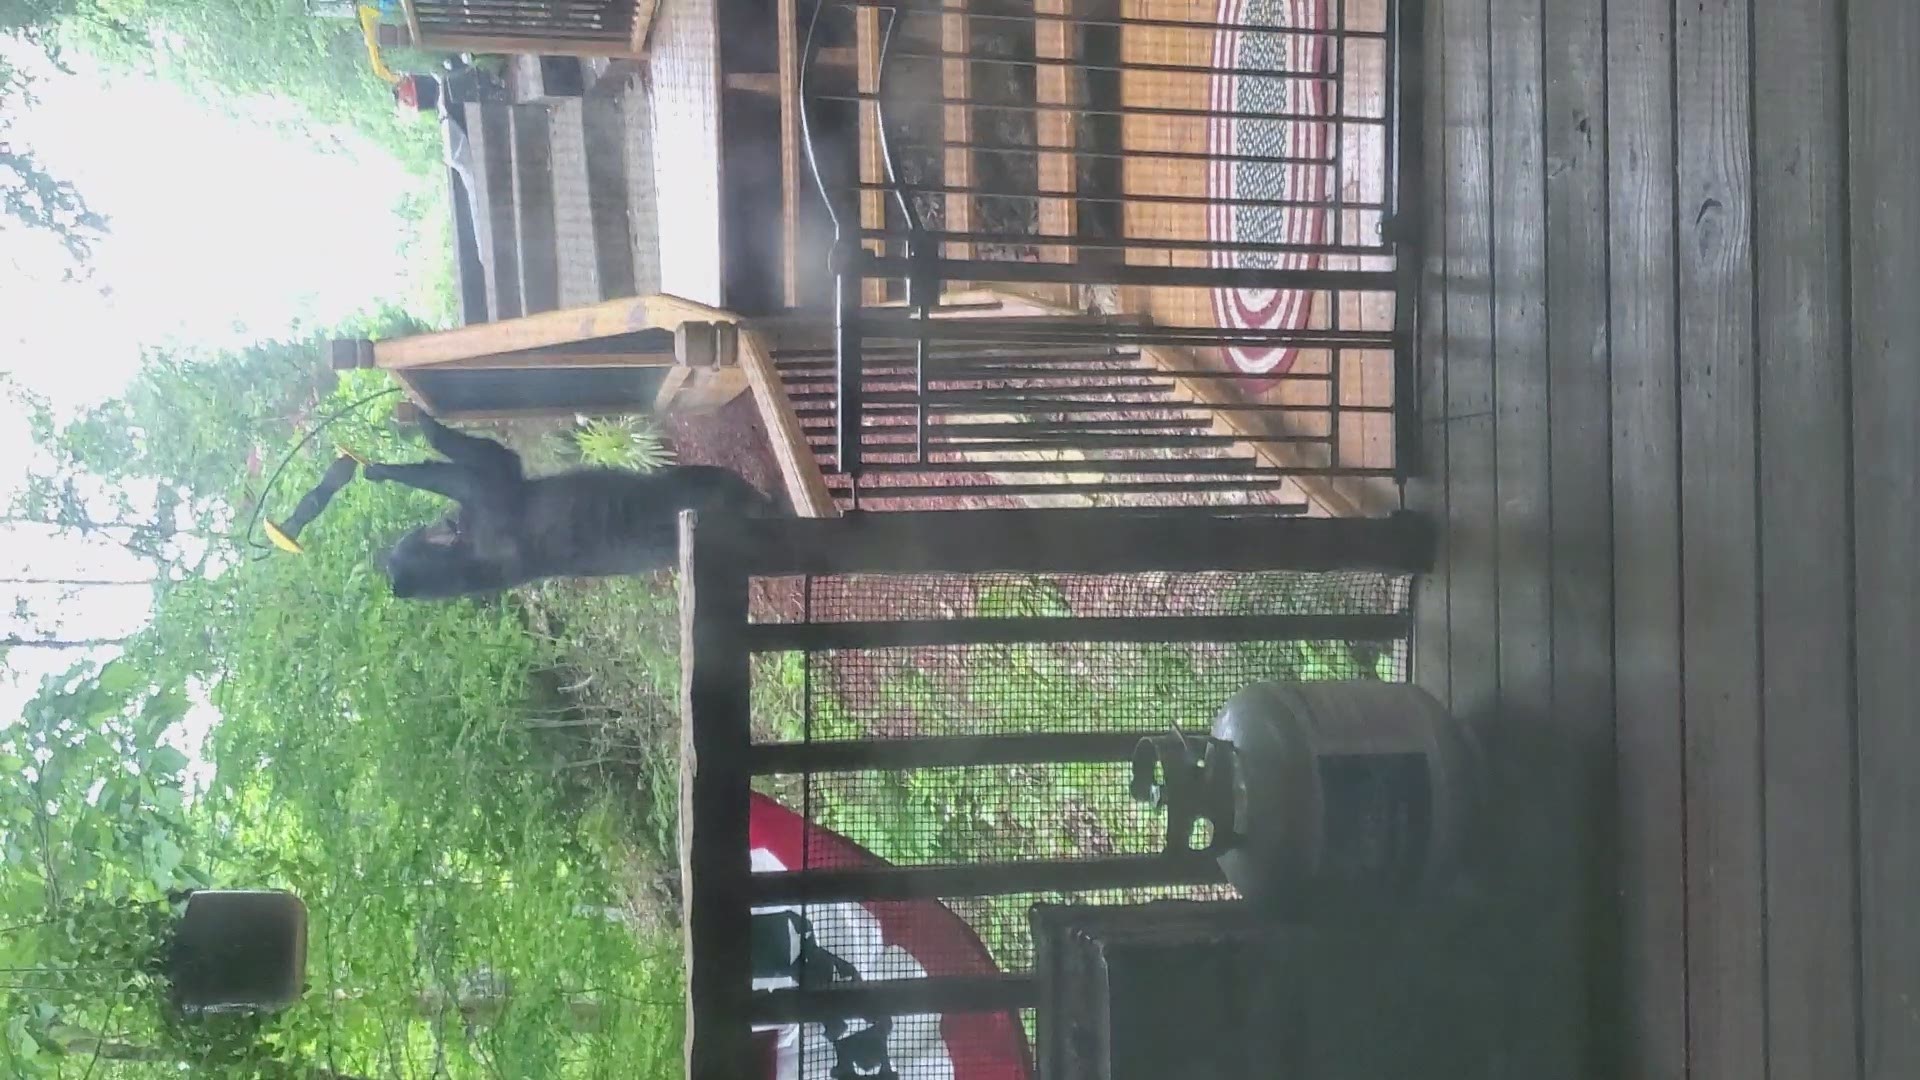 Viewer Beni Deron shared this video of a black bear helping itself to her mother's bird feeder.